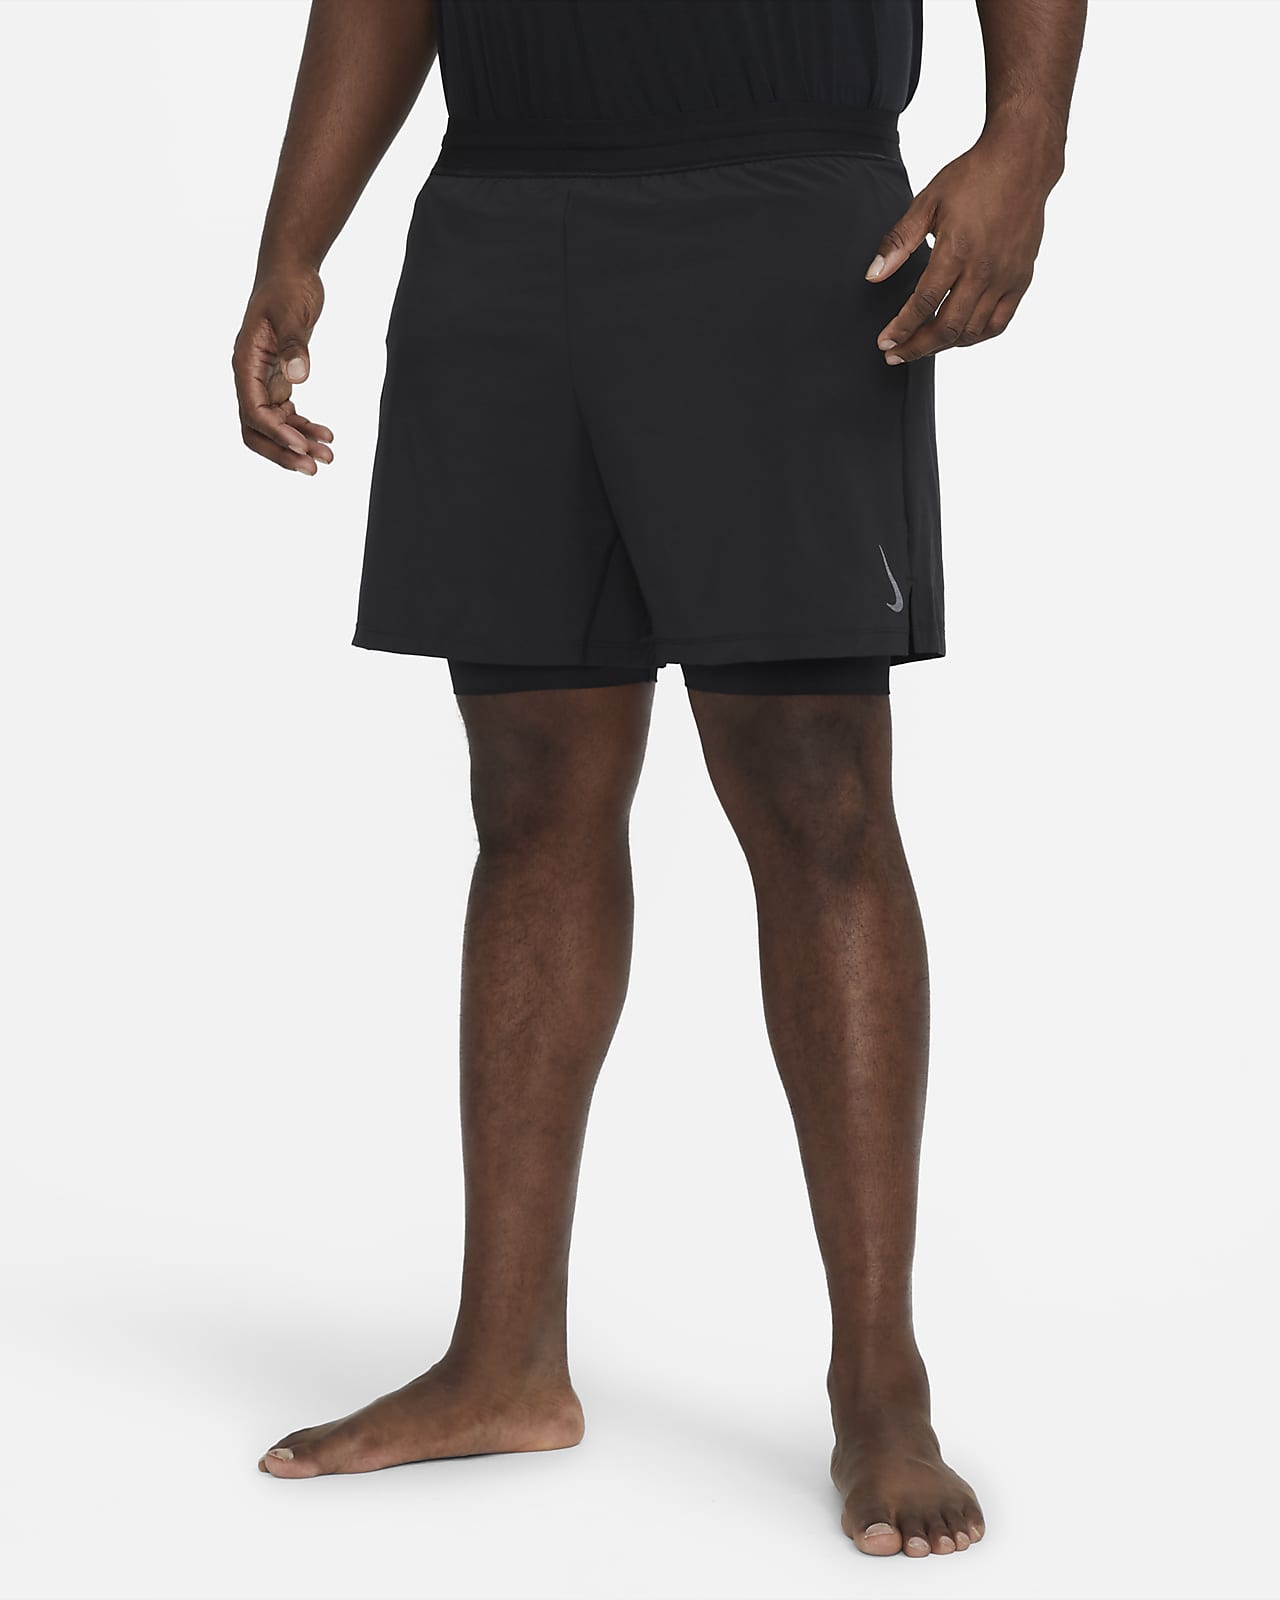 NIKE Yoga 2 in 1 Lined Shorts (dc5320-010) BLACK, SMALL